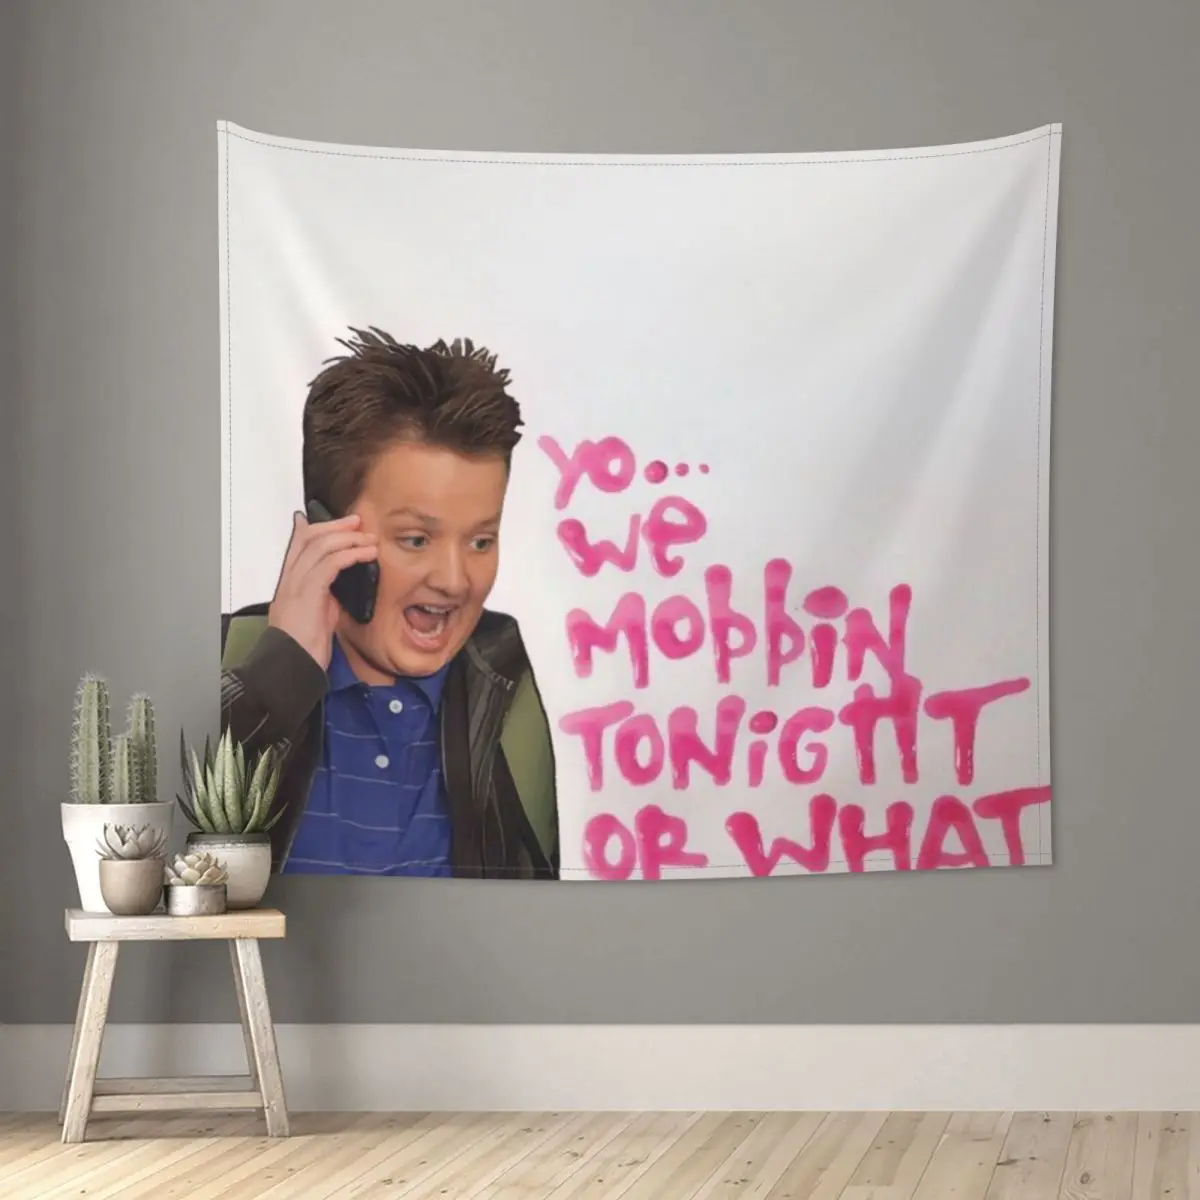 

Gibby Mobbin Or What Tapestry Colorful Polyester Wall Hanging ICarly Decoration for Bedroom Curtain Psychedelic Tapestries